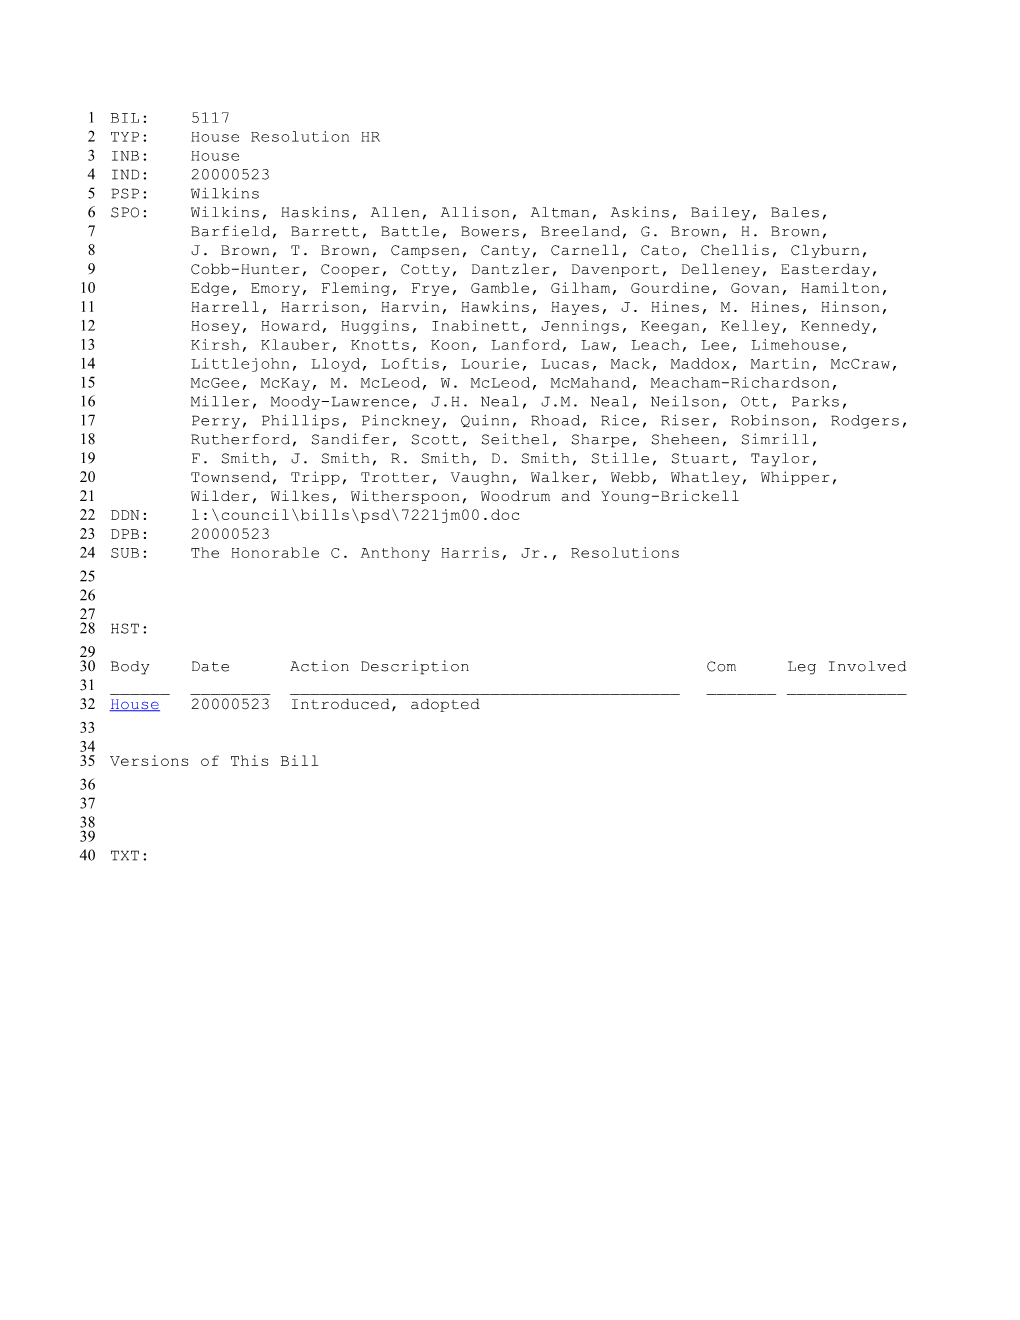 1999-2000 Bill 5117: the Honorable C. Anthony Harris, Jr., Resolutions - South Carolina